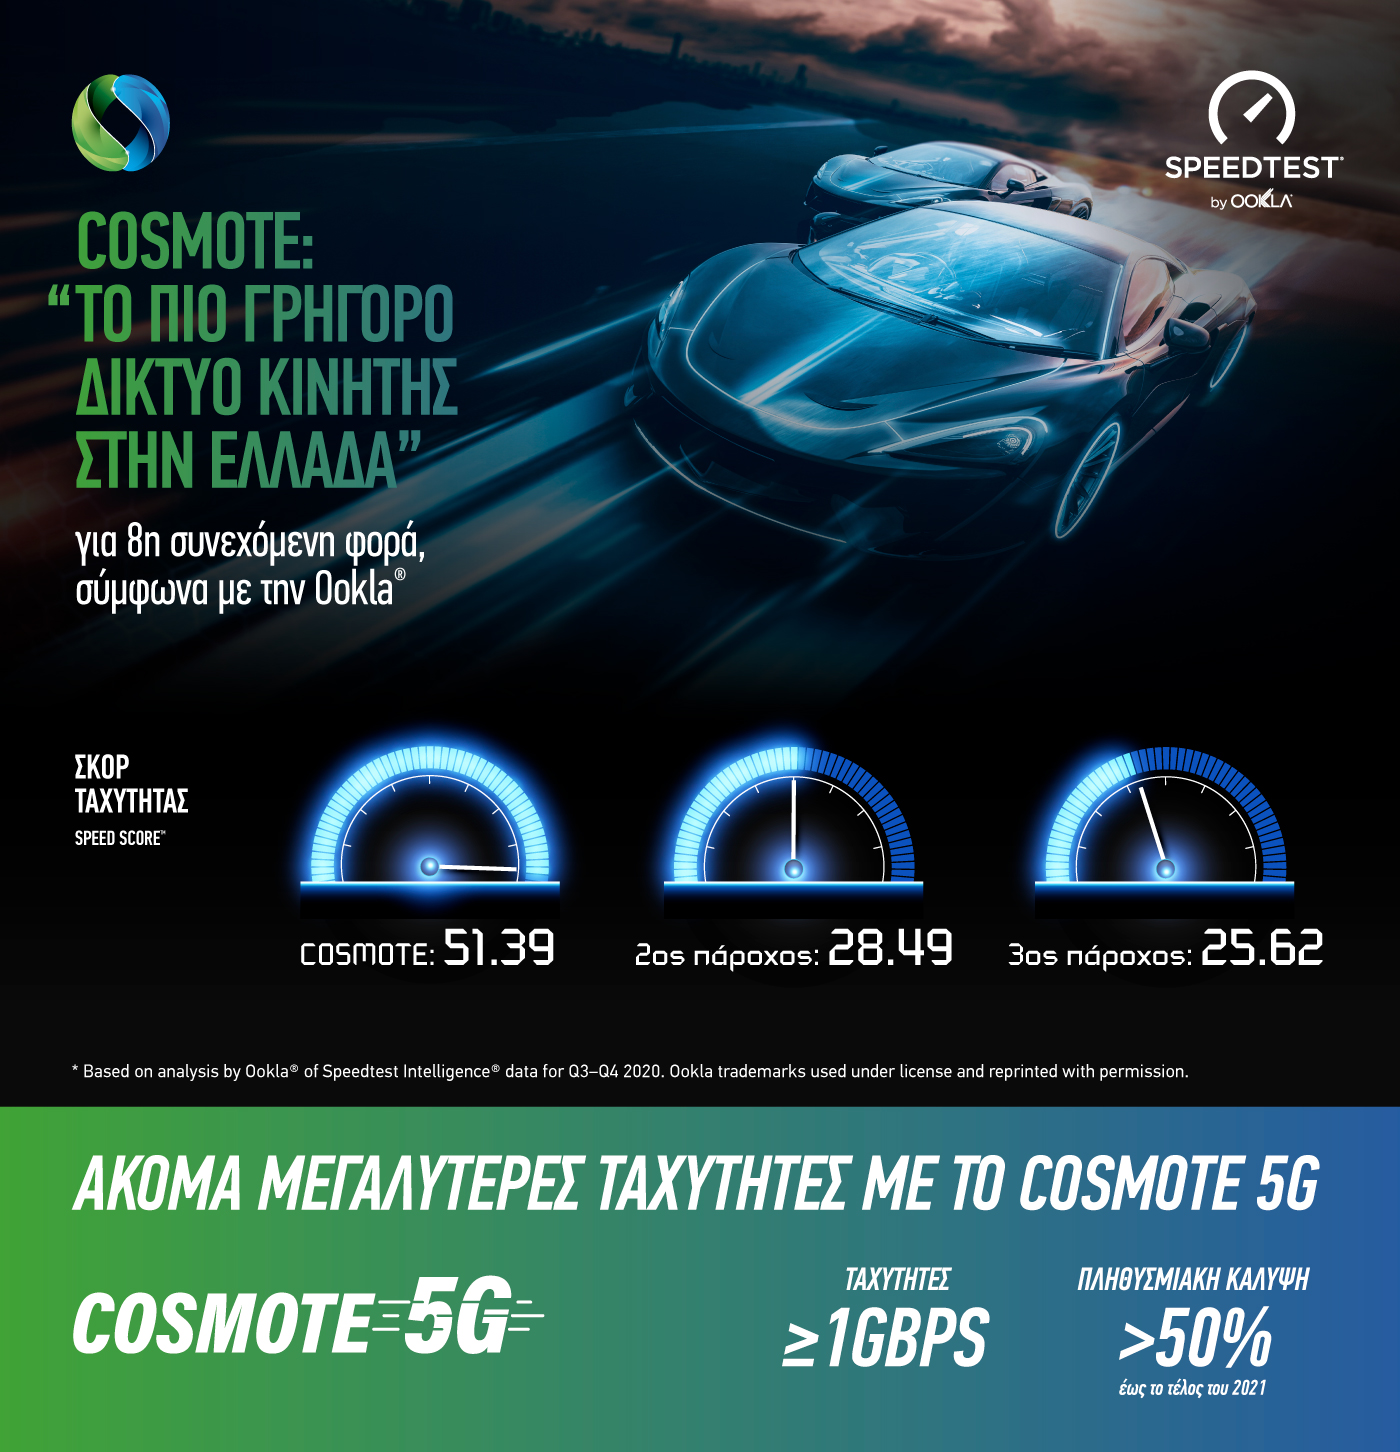 cosmote_ookla2021_infographic_gr.jpg